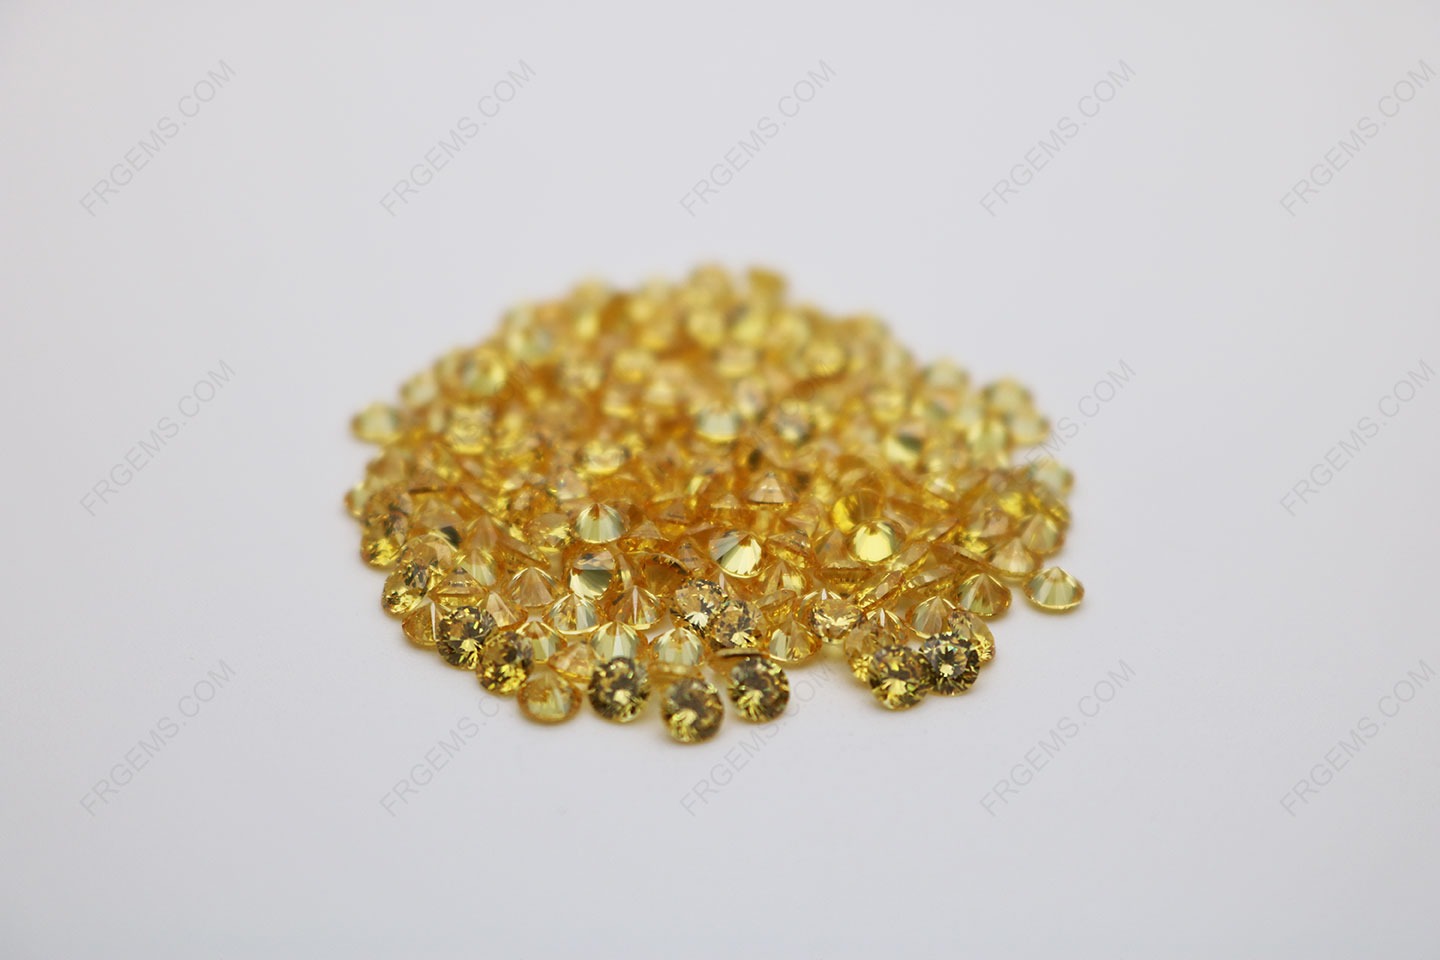 Cubic Zirconia Golden Yellow Round Shape faceted diamond Cut 3mm stones CZ05 IMG_0352